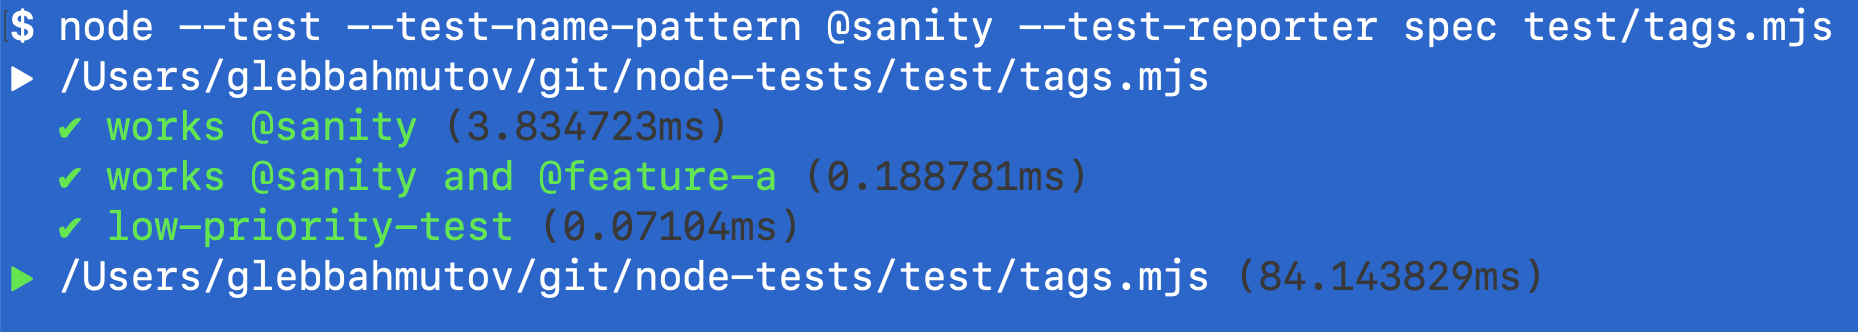 No sign that some tests were filtered when using the spec reporter